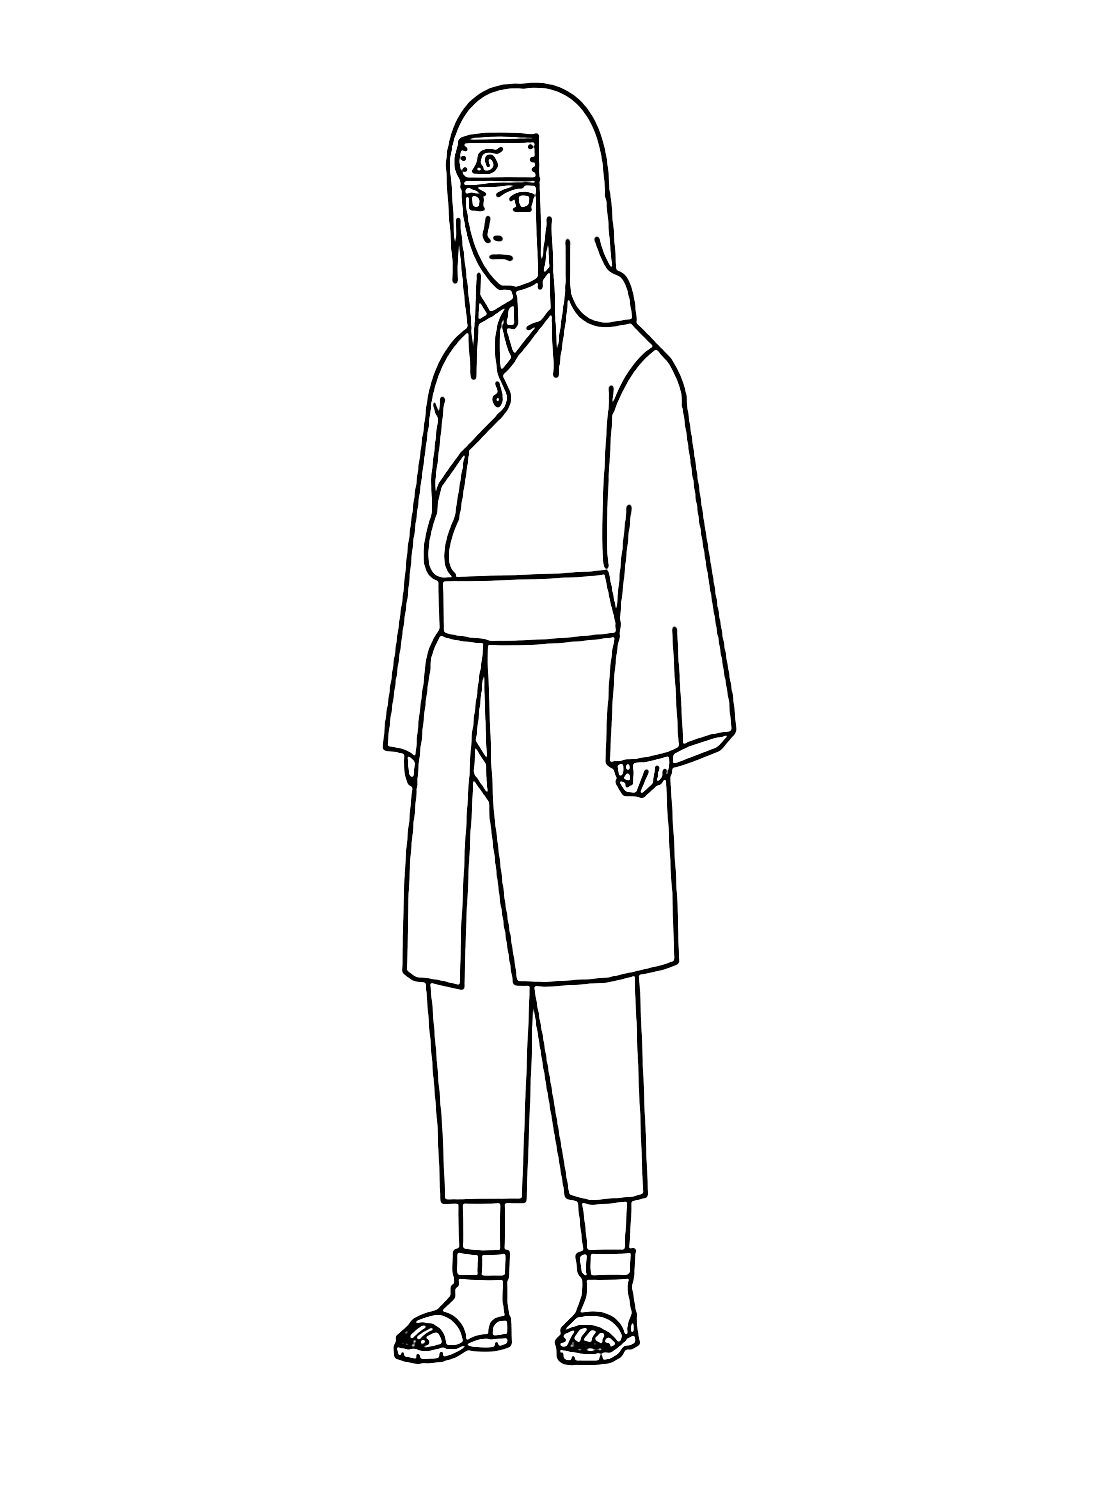 Hyuga Neji Picture to Color from Neji